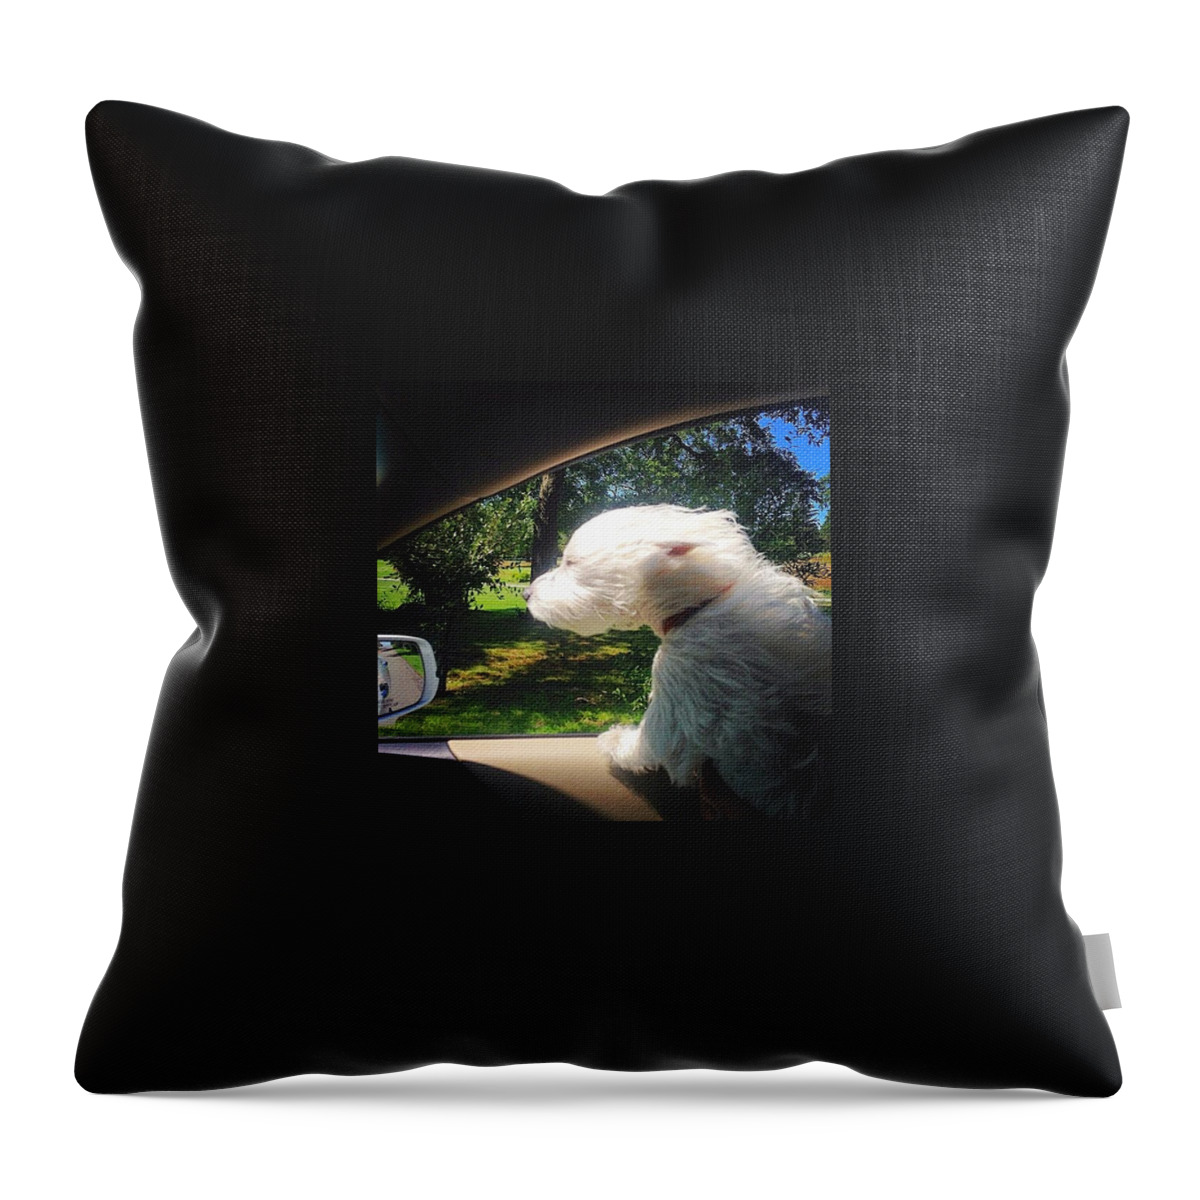 Happy Throw Pillow featuring the photograph Trip To The Groomer by Kate Arsenault 